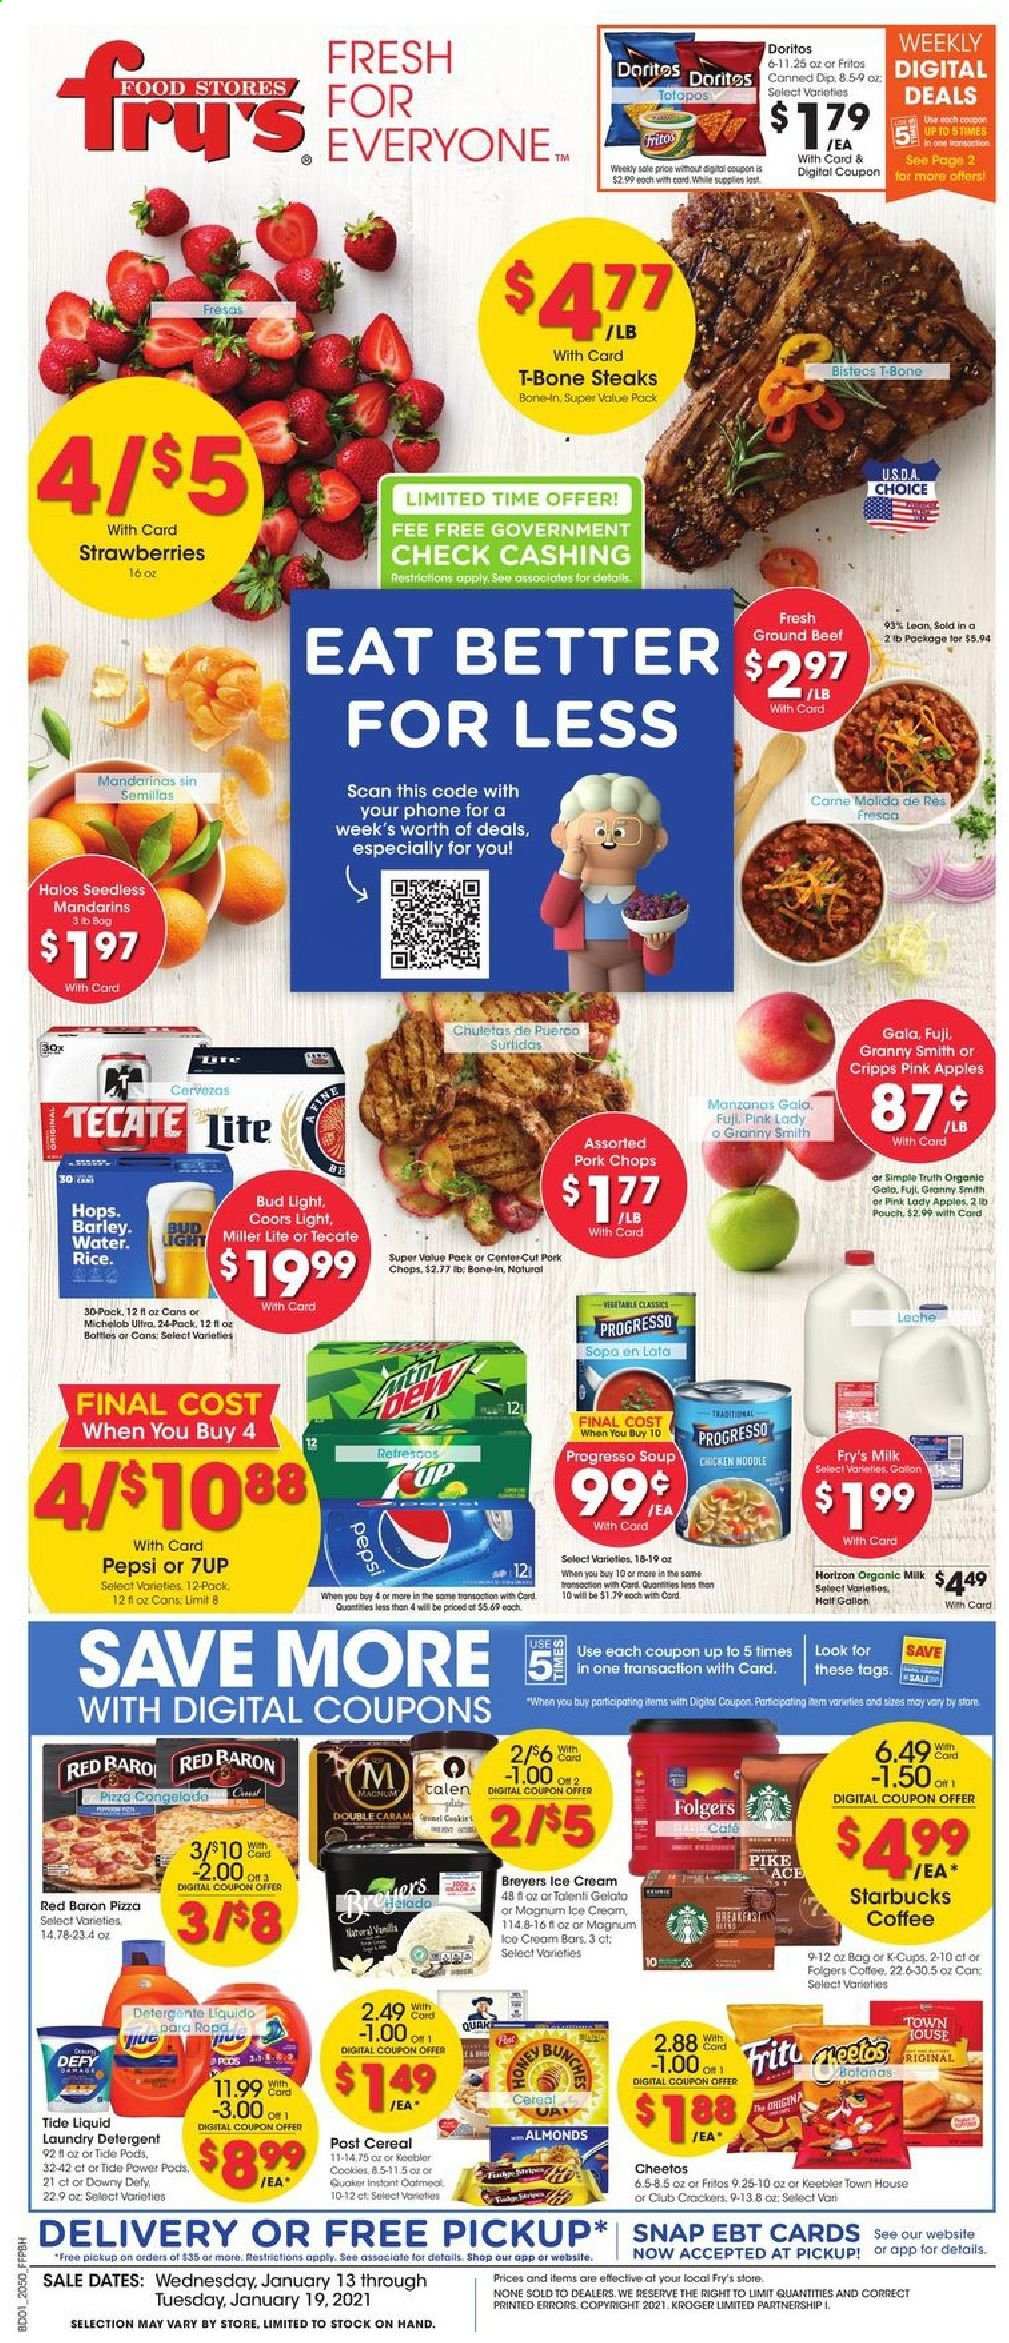 thumbnail - Fry’s Flyer - 01/13/2021 - 01/19/2021 - Sales products - apples, northern pike, pizza, Quaker, Progresso, organic milk, dip, ice cream, Talenti Gelato, gelato, strawberries, Red Baron, cookies, crackers, Keebler, Doritos, Cheetos, oatmeal, mandarines, cereals, Fritos, noodles, almonds, Pepsi, 7UP, coffee, Starbucks, Folgers, coffee capsules, K-Cups, beer, Miller Lite, Coors, Michelob, Bud Light, beef meat, ground beef, t-bone steak, steak, pork chops, pork meat, detergent, Ace, Tide, laundry detergent, lens. Page 1.